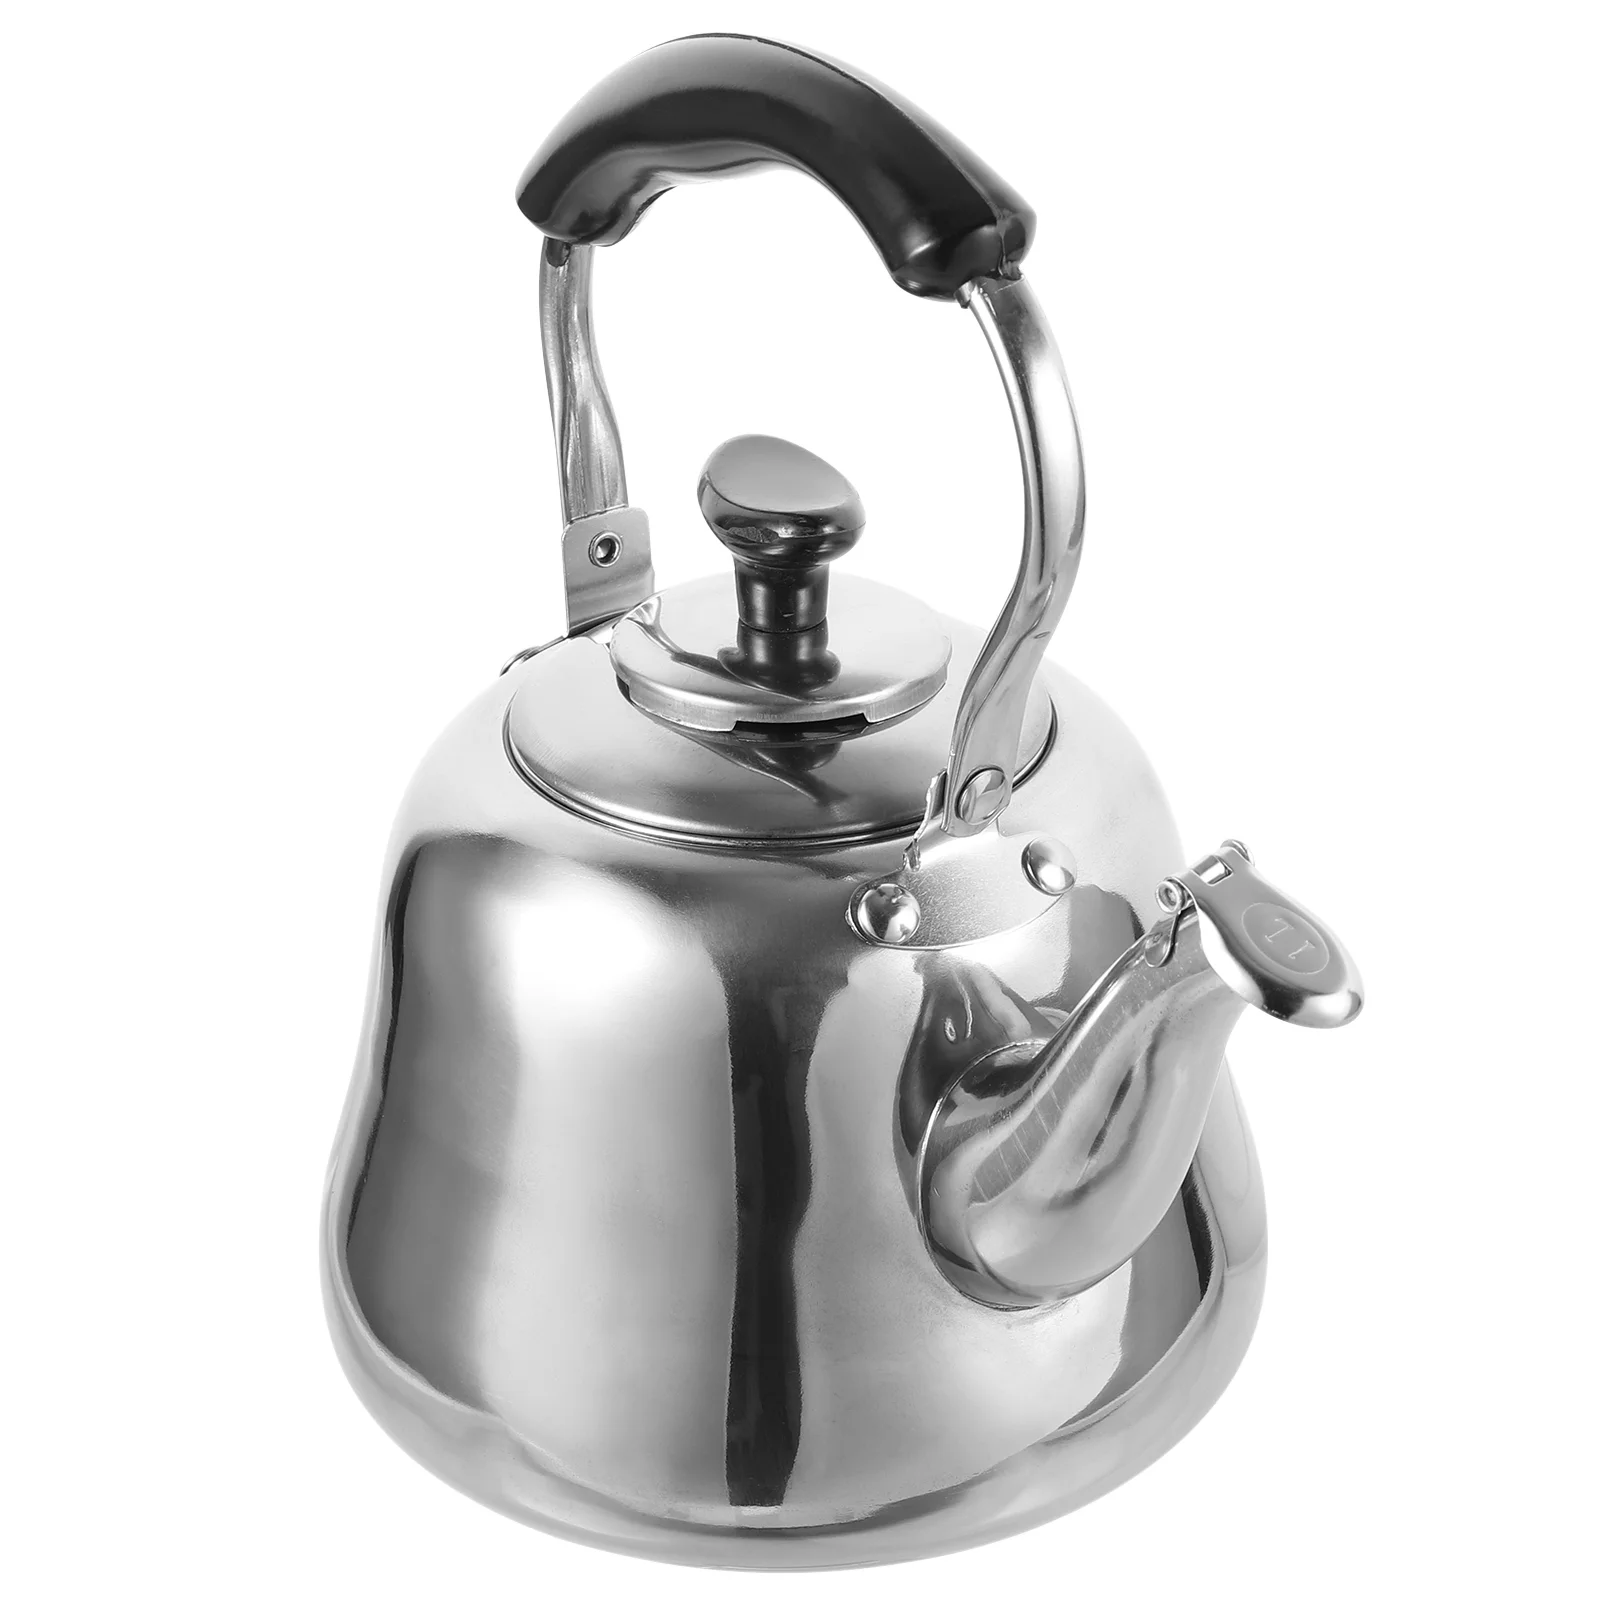 

Chirping Kettle Heating Water Teakettle Home Stainless Steel Jug Heater Household Whistling Make Camping Gas Home-appliance